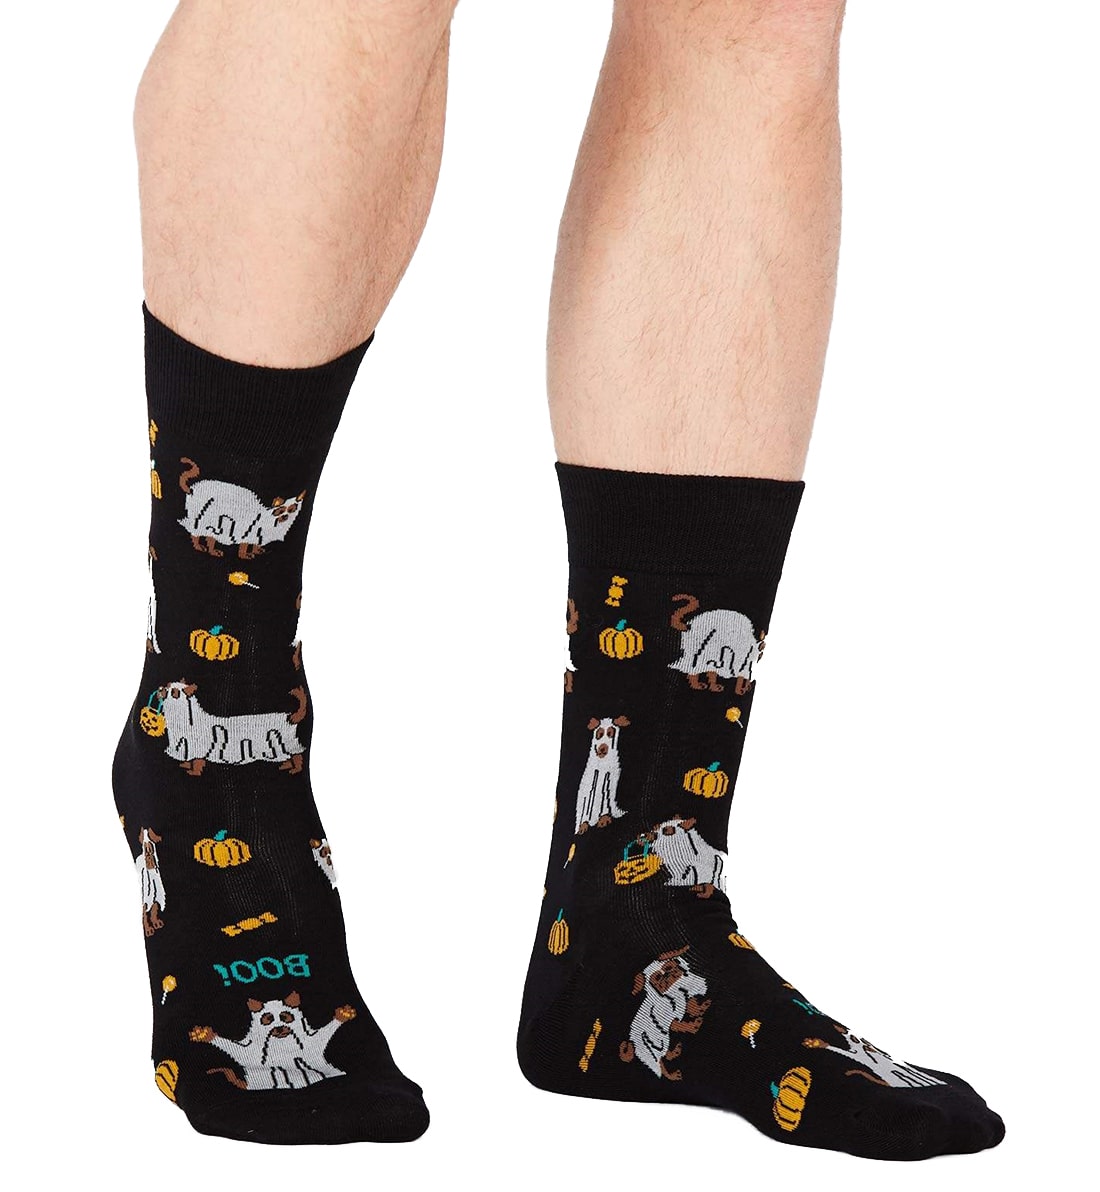 SOCK it to me Men&#39;s Crew Socks (mef0324),Trick Or Treat - Trick Or Treat,One Size